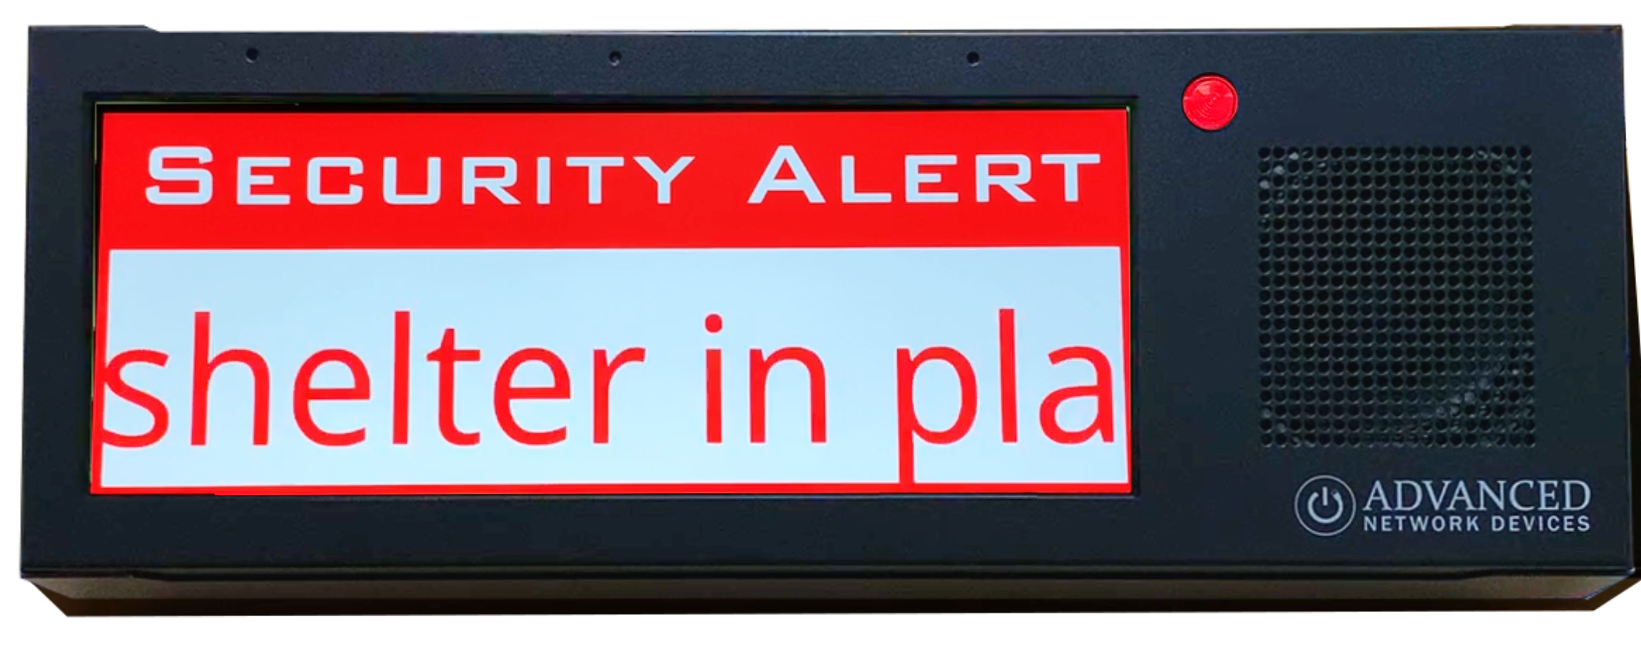 HD Security Alert Flasher by ANetD